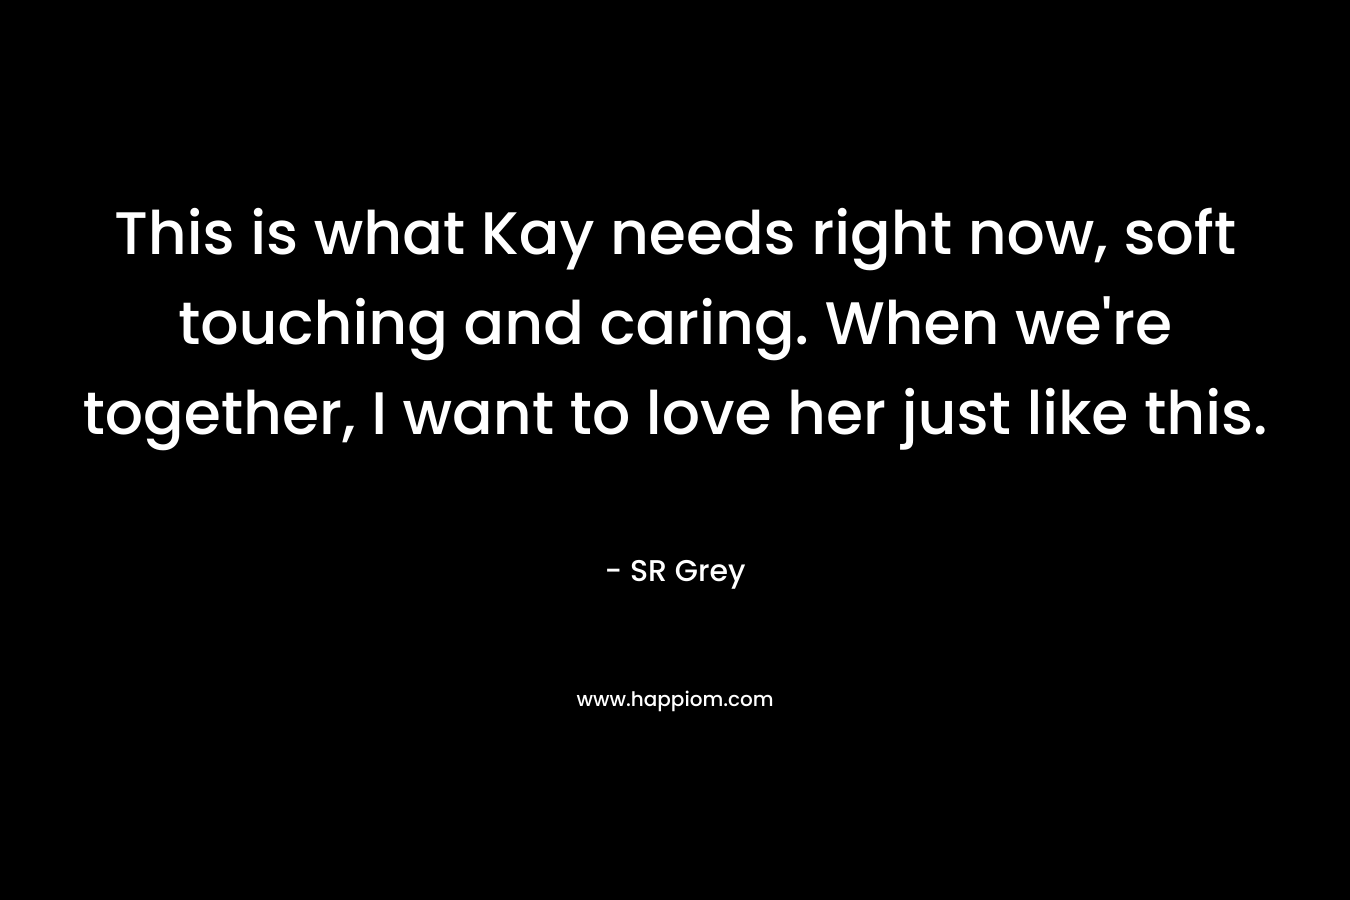 This is what Kay needs right now, soft touching and caring. When we’re together, I want to love her just like this. – SR Grey